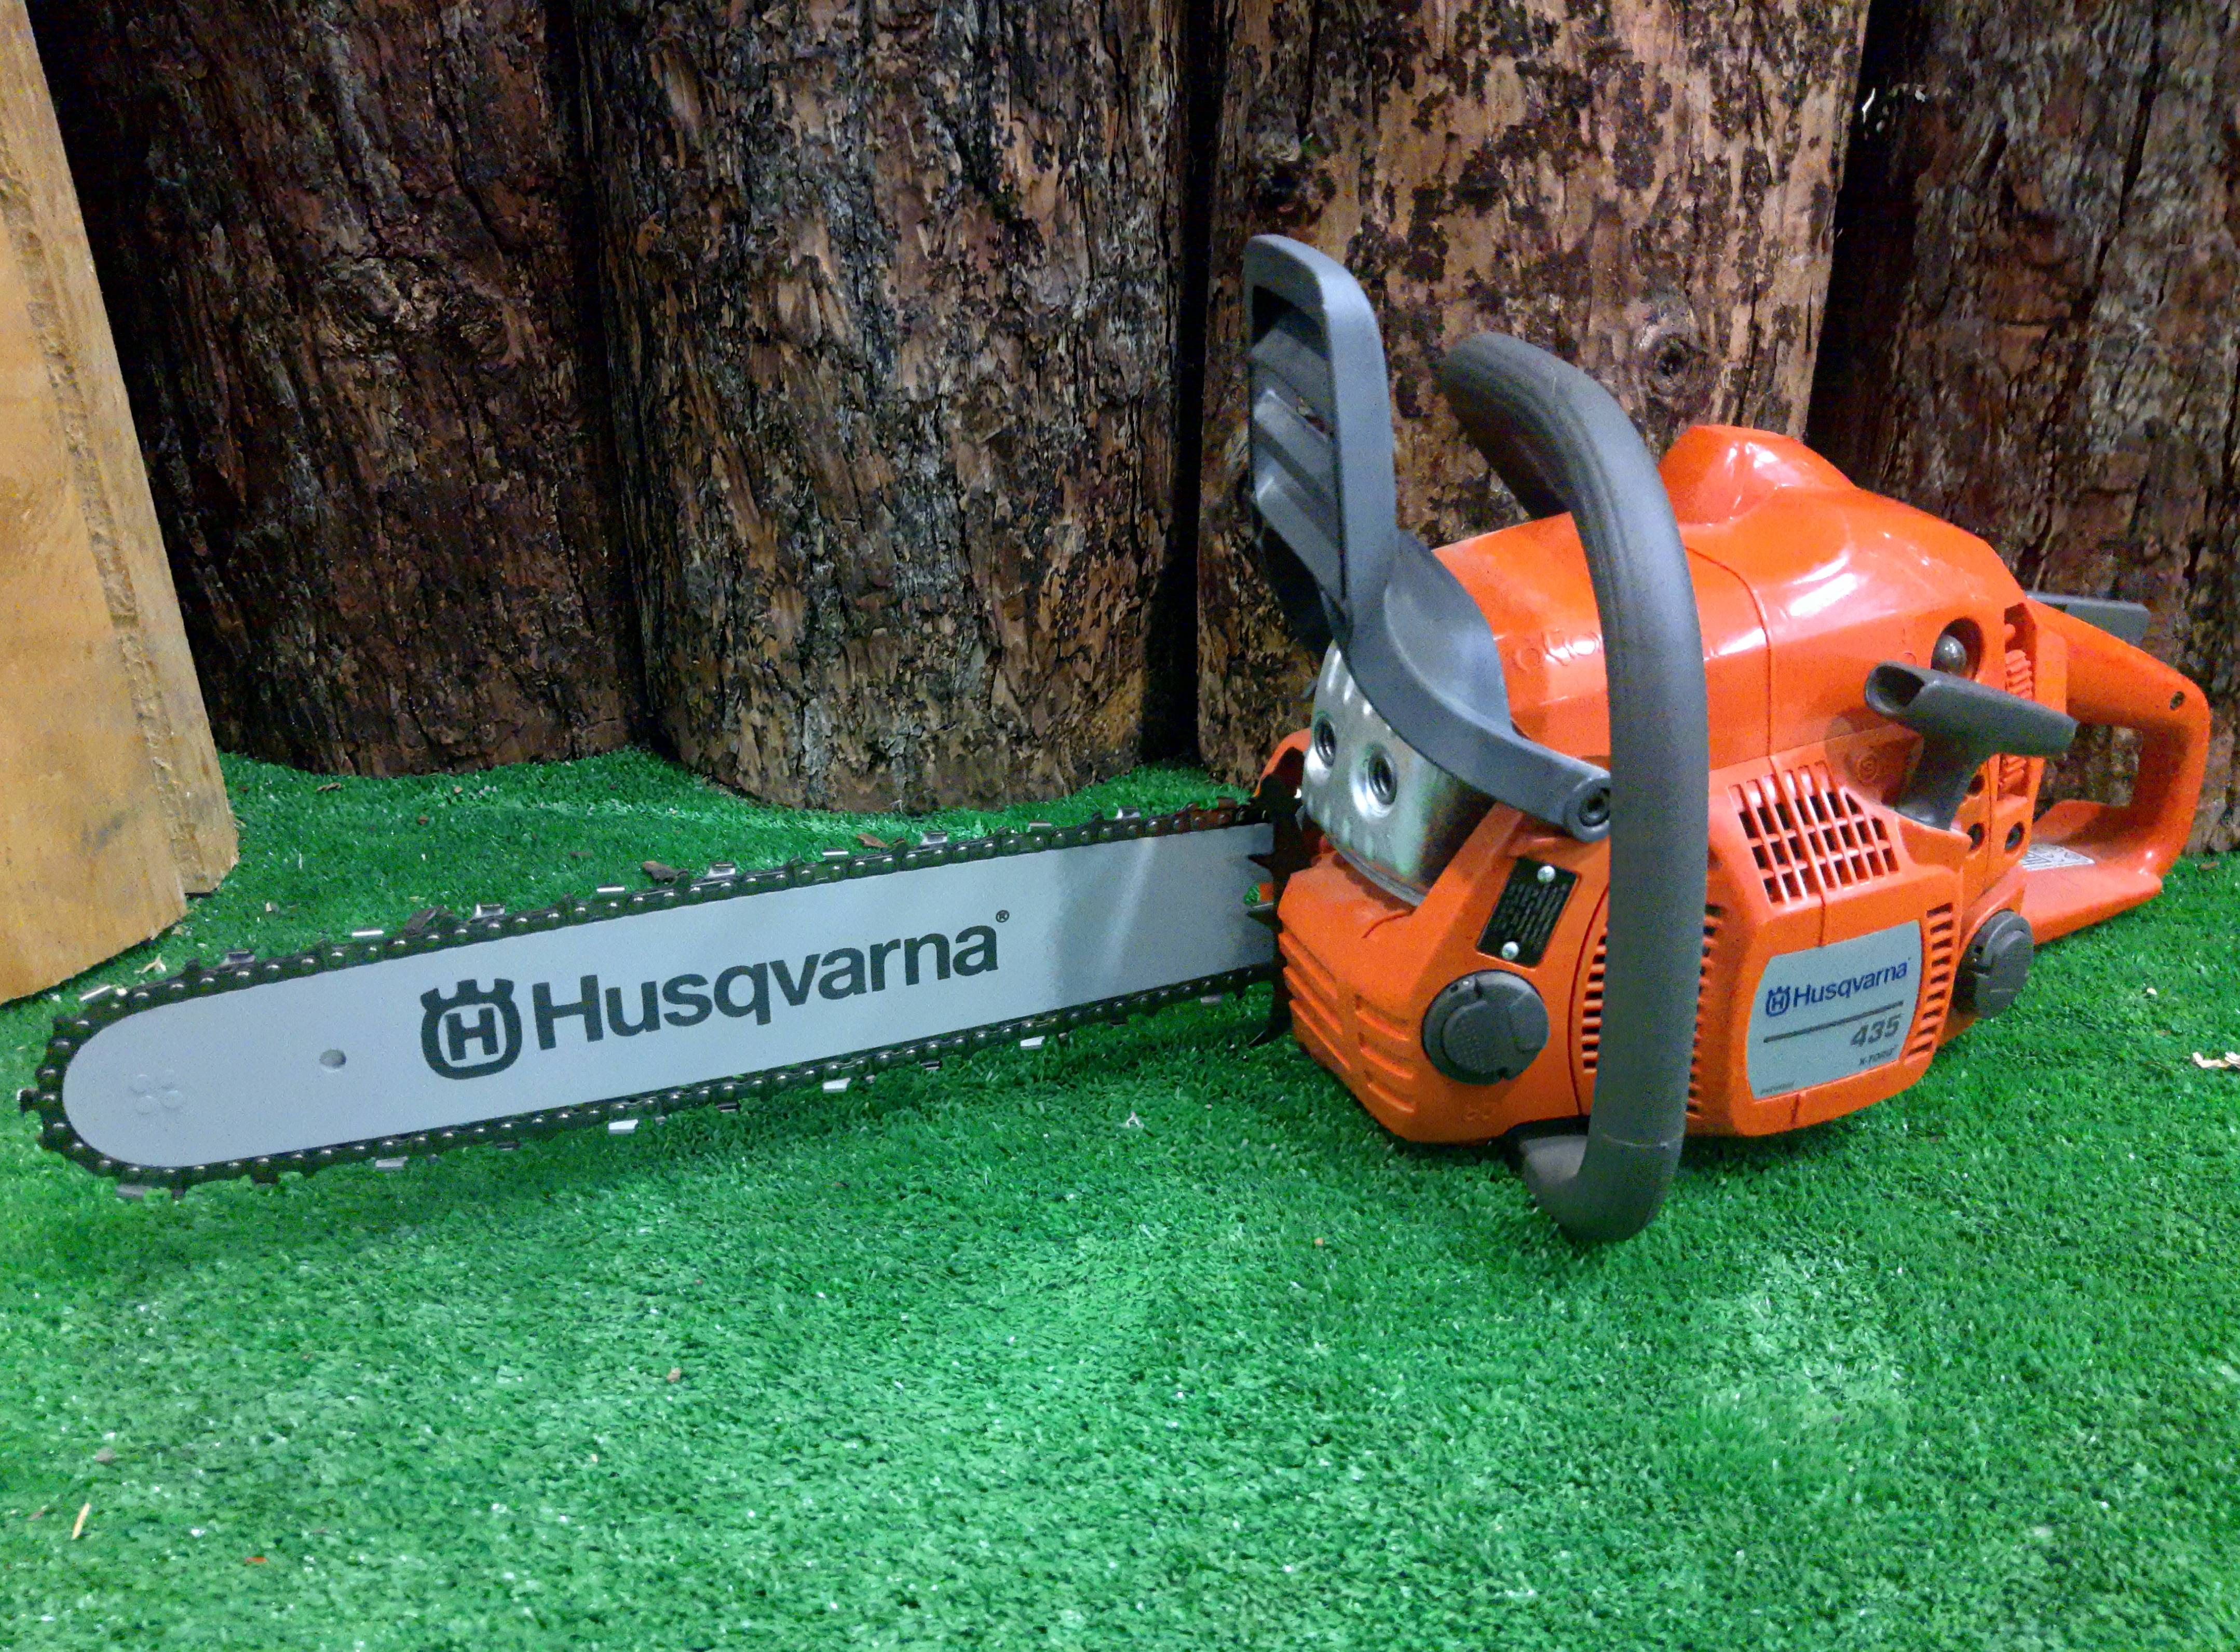 Husqvarna 435 chainsaw review in 2021